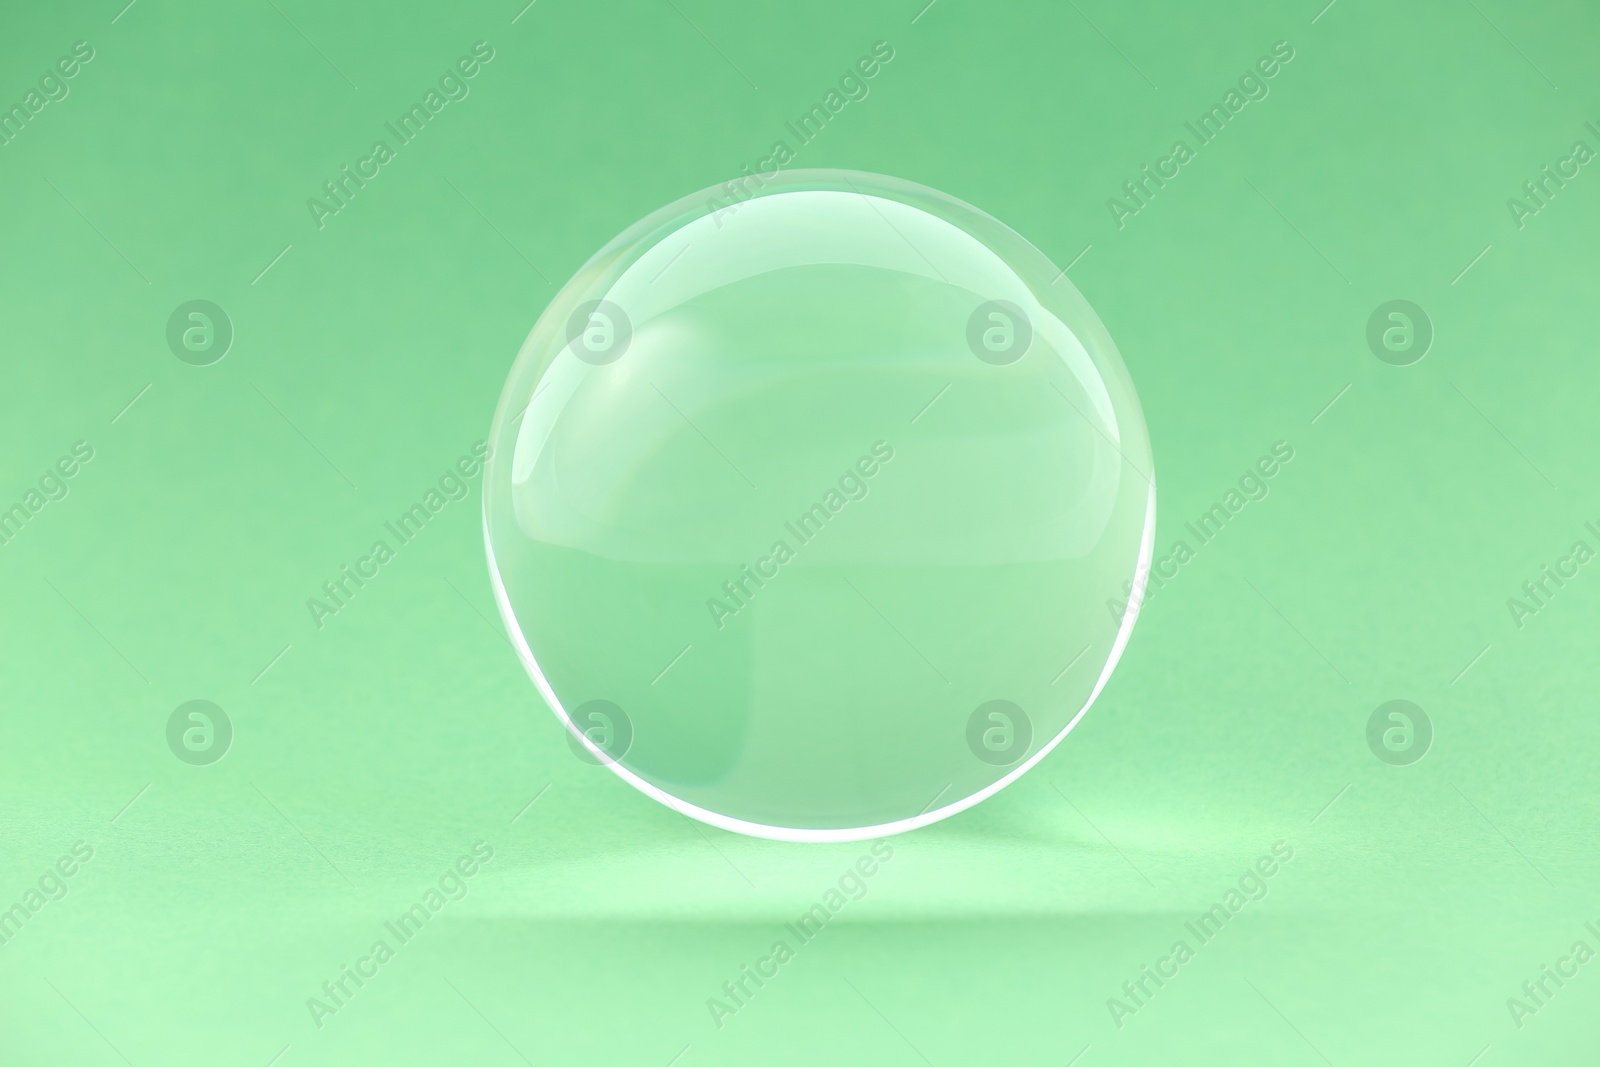 Photo of Transparent glass ball on light green background